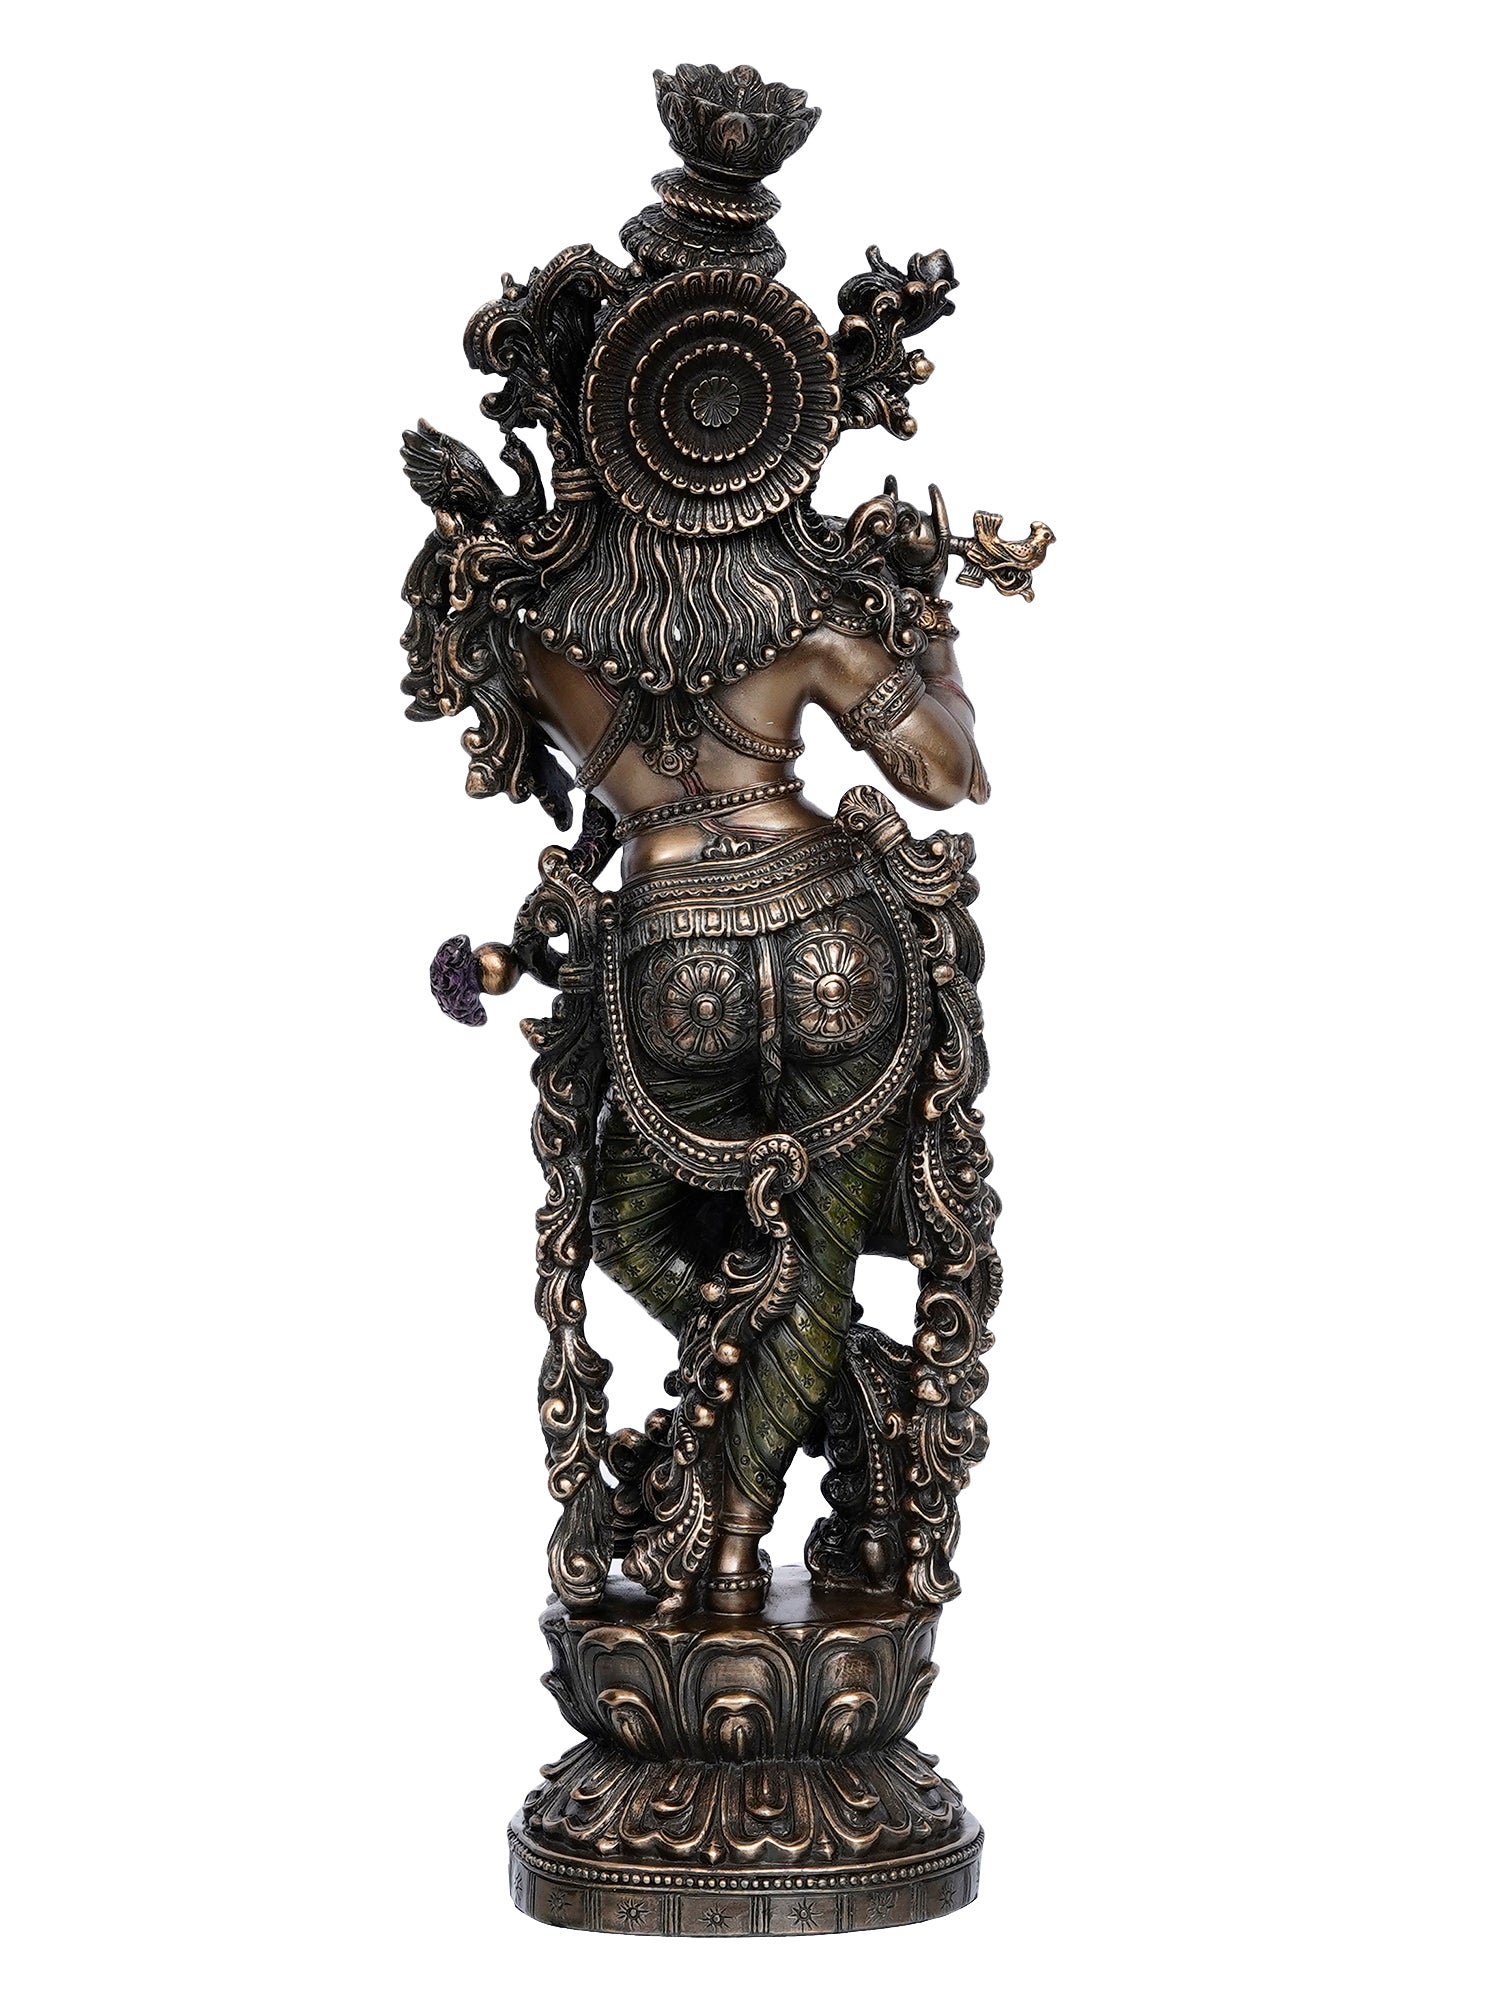 Brown Polyresin and Bronze Decorative Ethnic Carved Dancing Lord Krishna Playing Flute Figurine 5